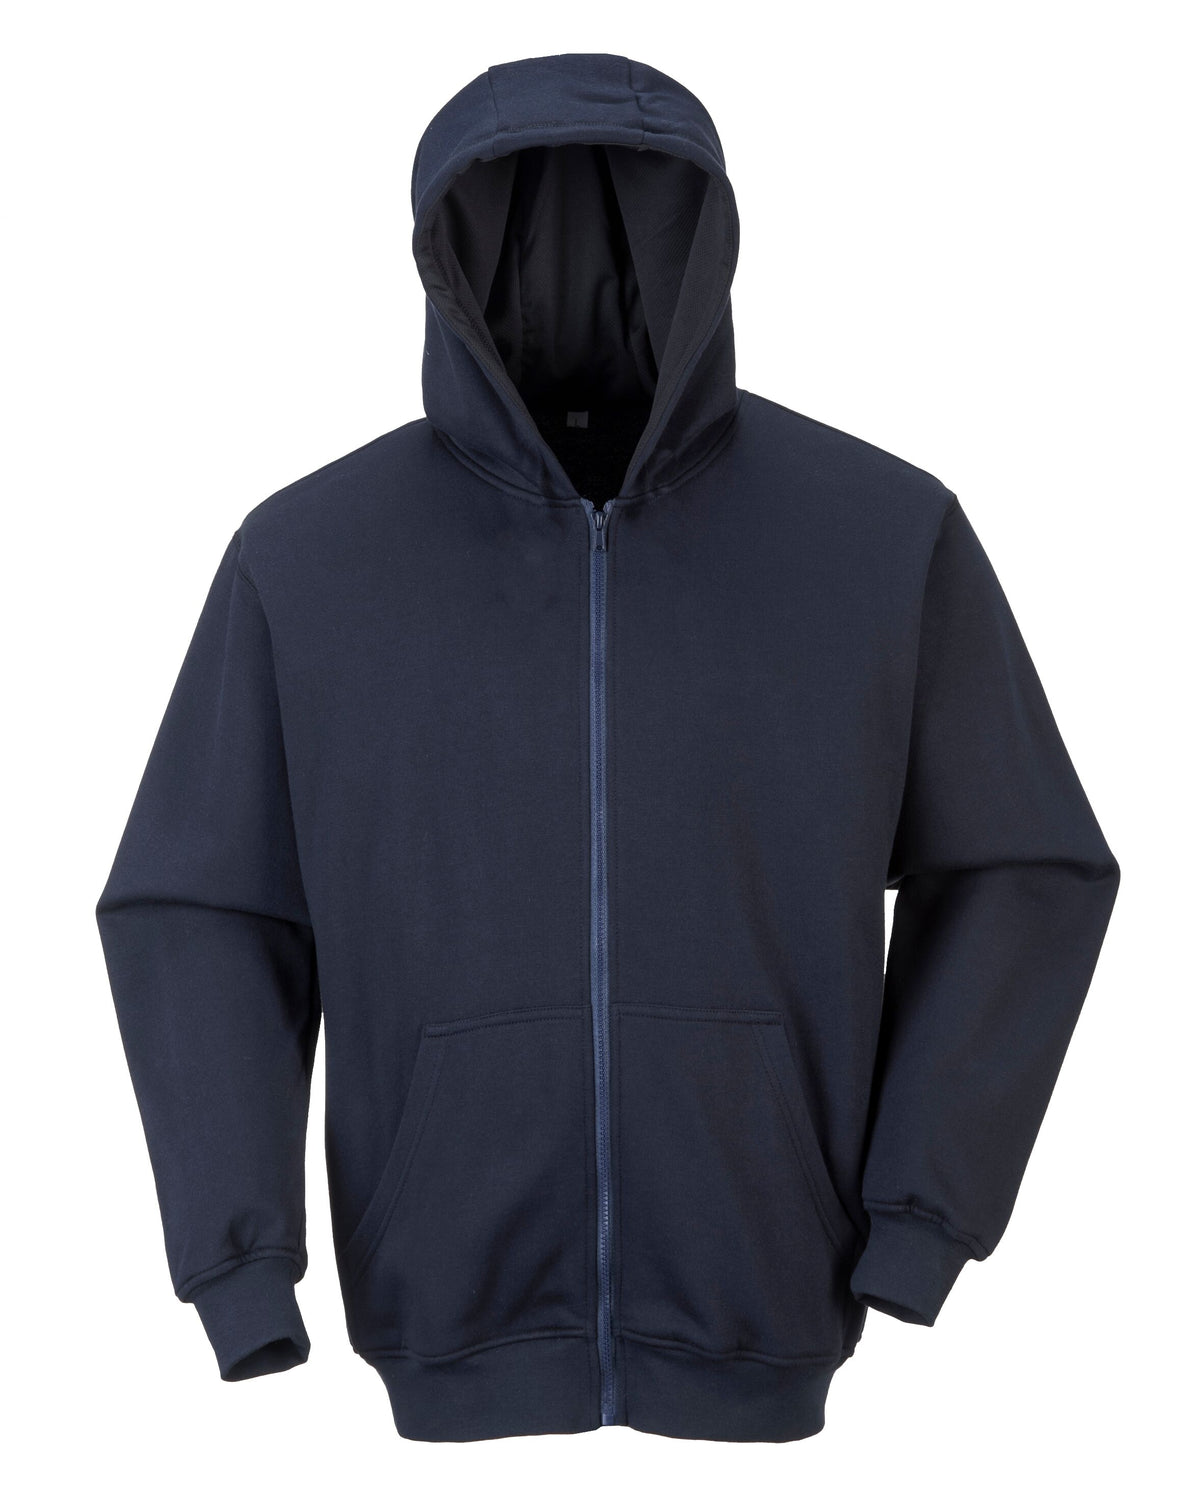 Flame Resistant Zipper Front Hooded Sweatshirt - Hoodie Clothing - Safety Jacket for Men